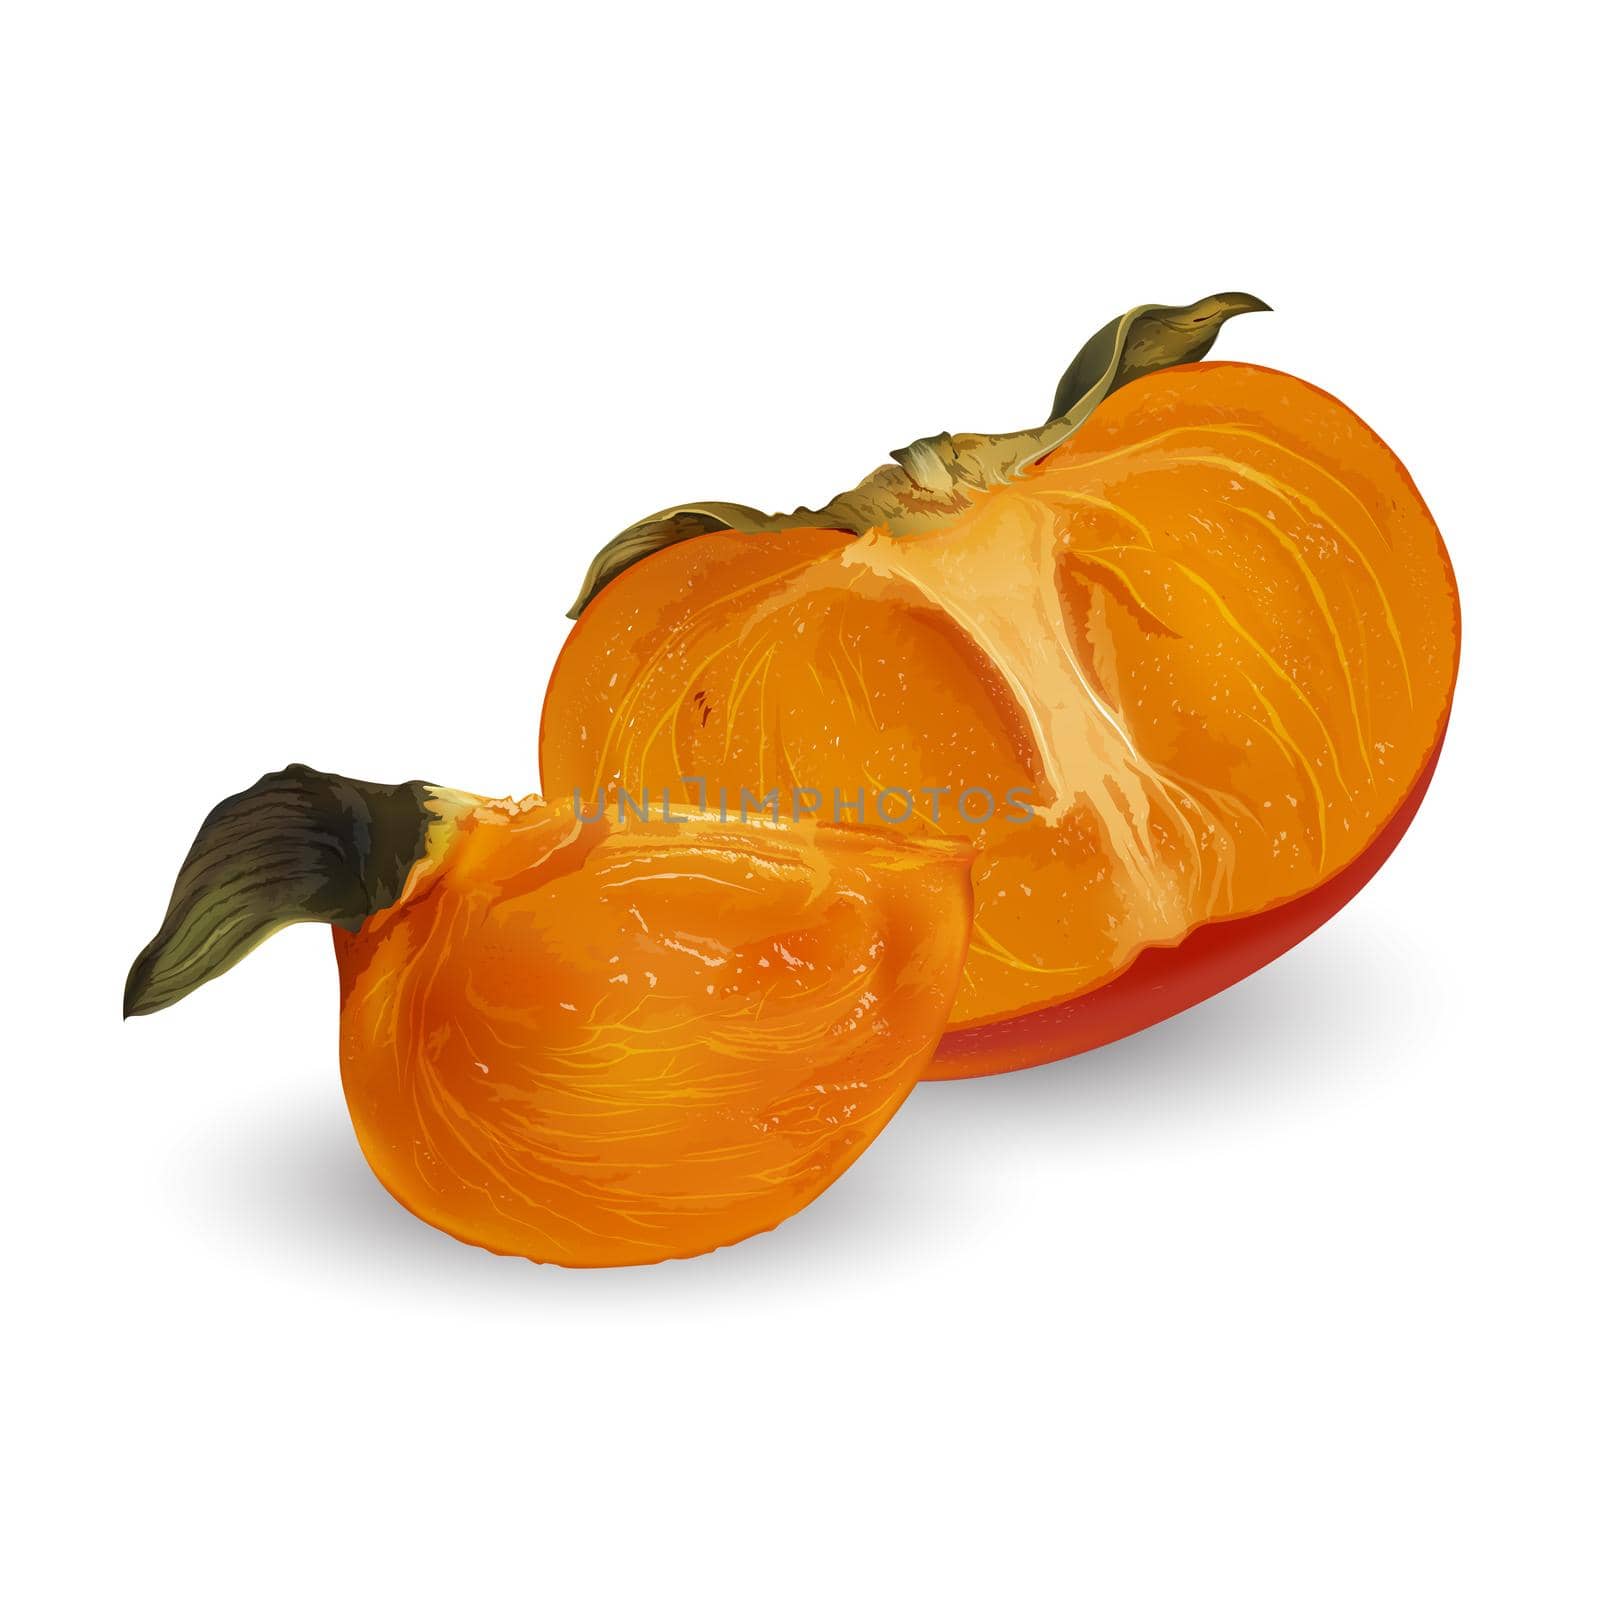 Sliced juicy persimmon on a white background. by ConceptCafe